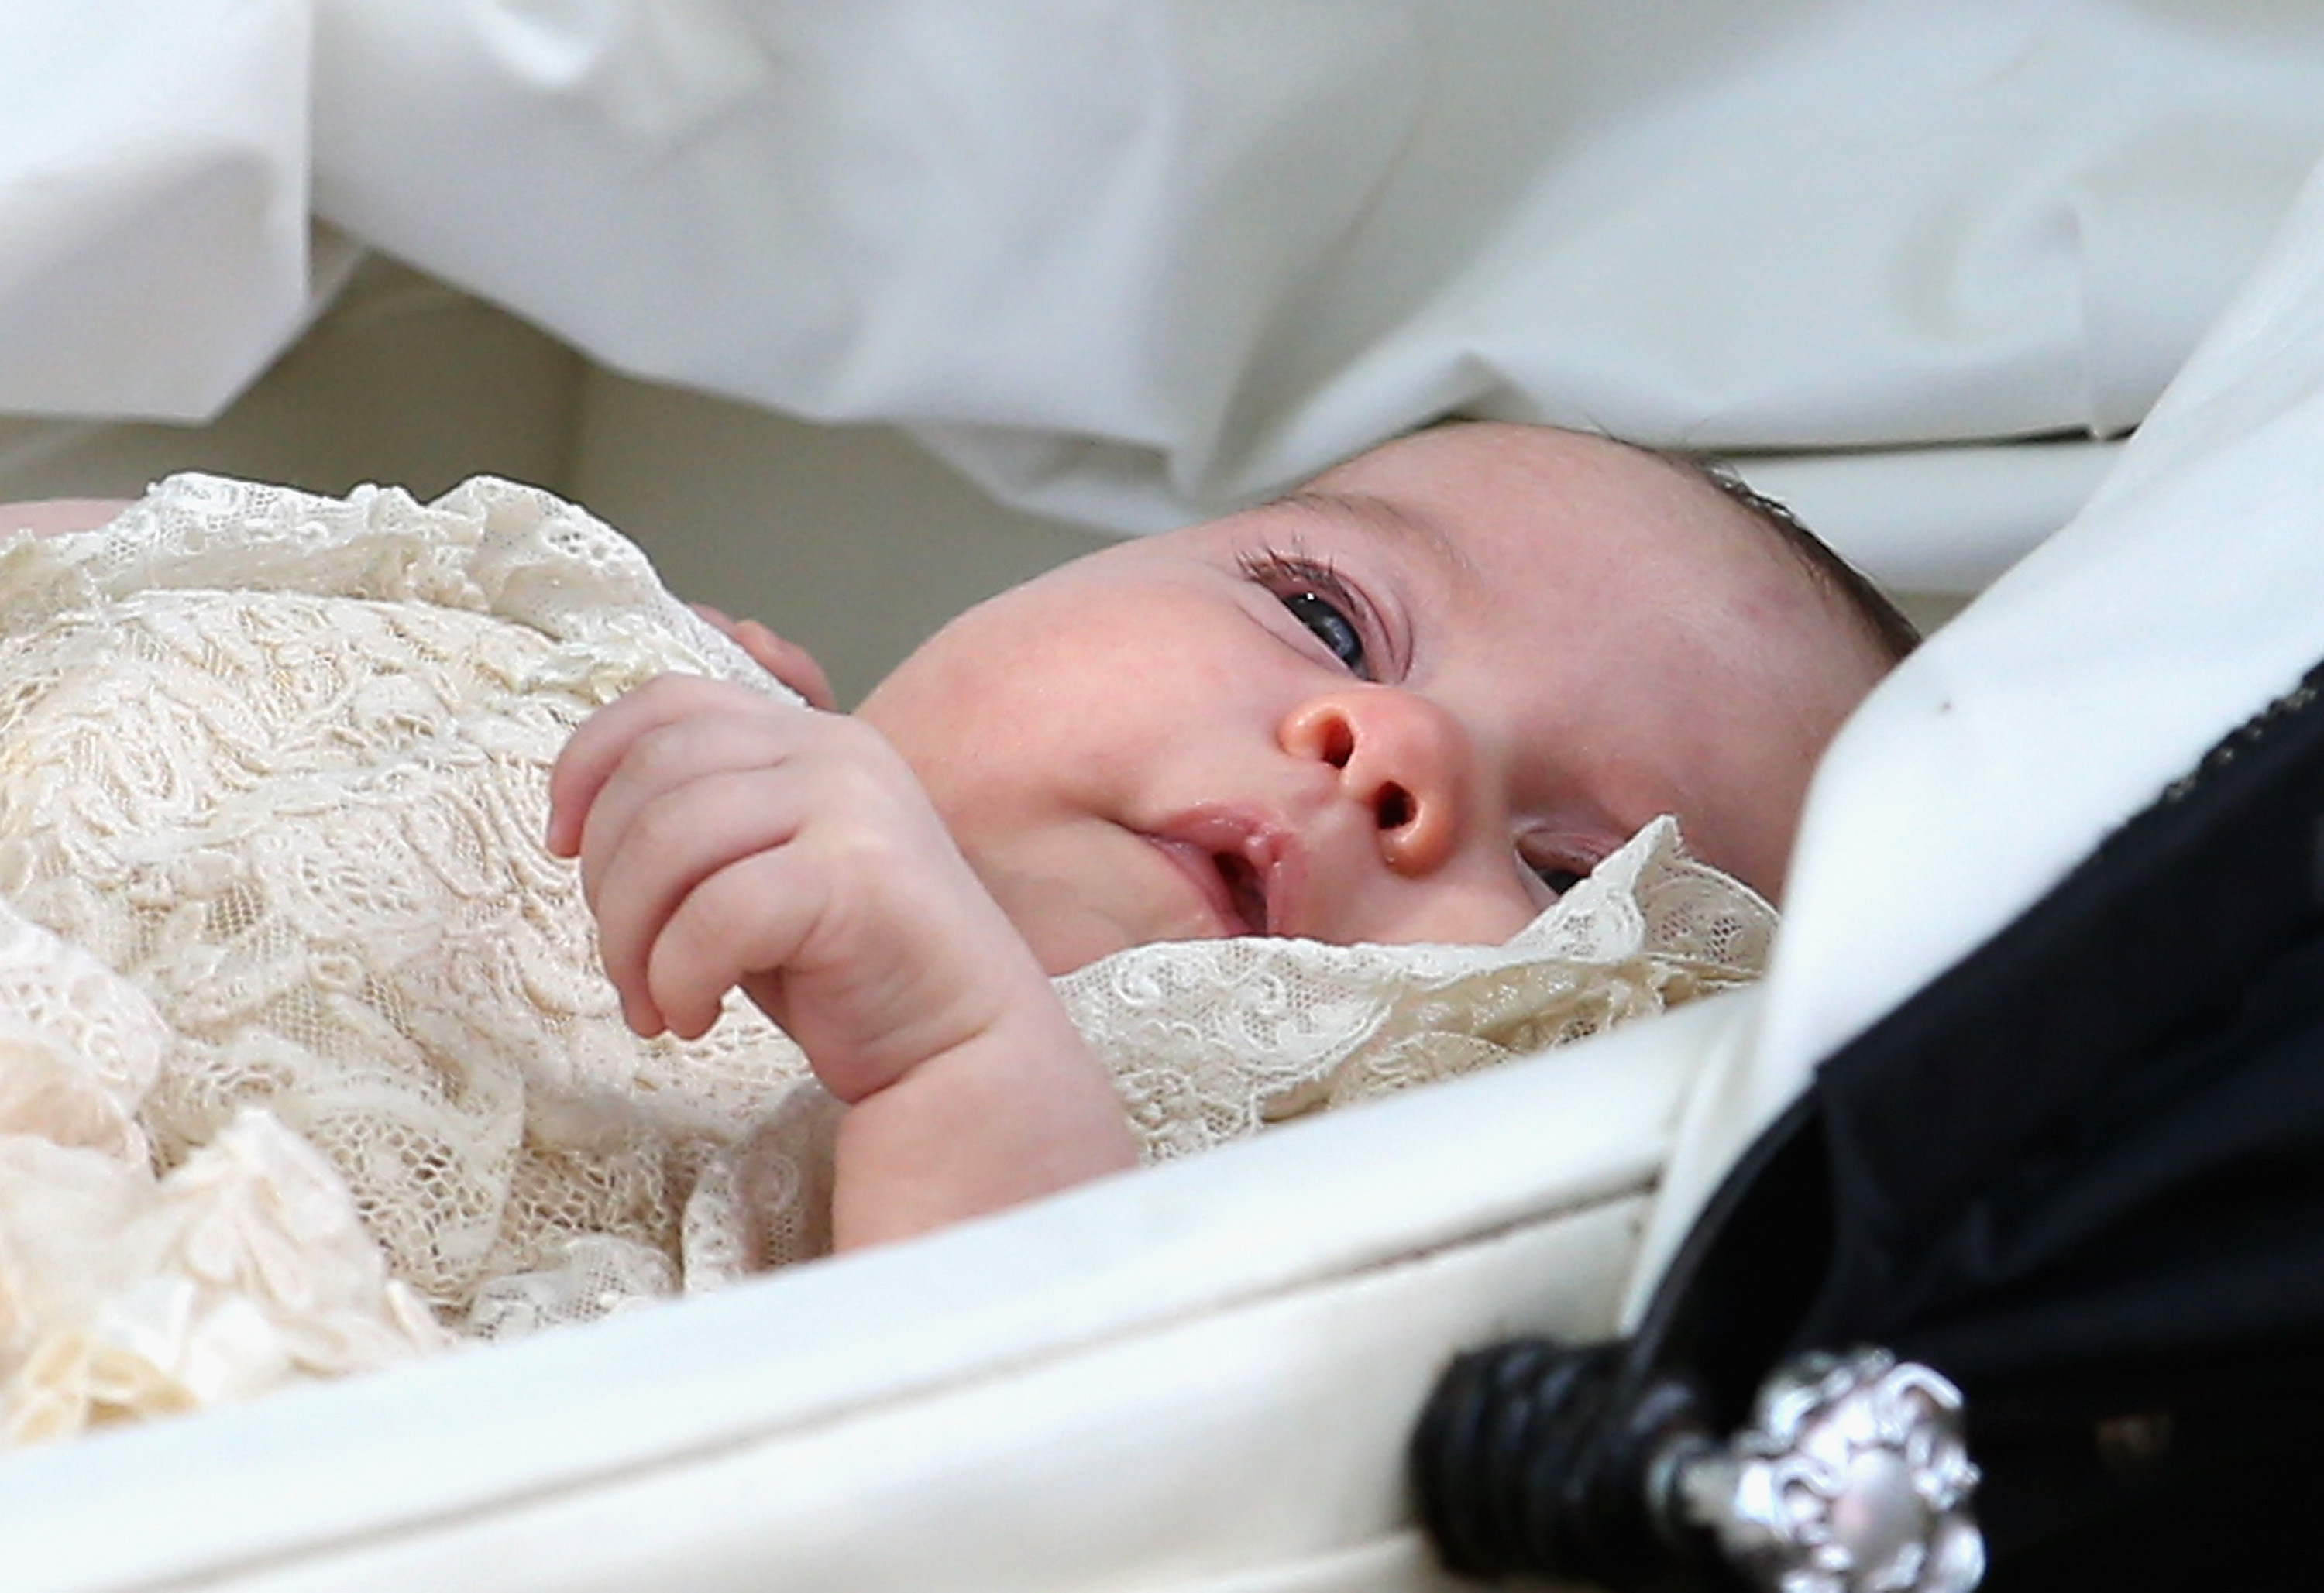 <p>Photographers got a peek at Princess Charlotte's pretty little face as she was pushed in her Silver Cross pram on her christening day, July 5, 2015.</p>